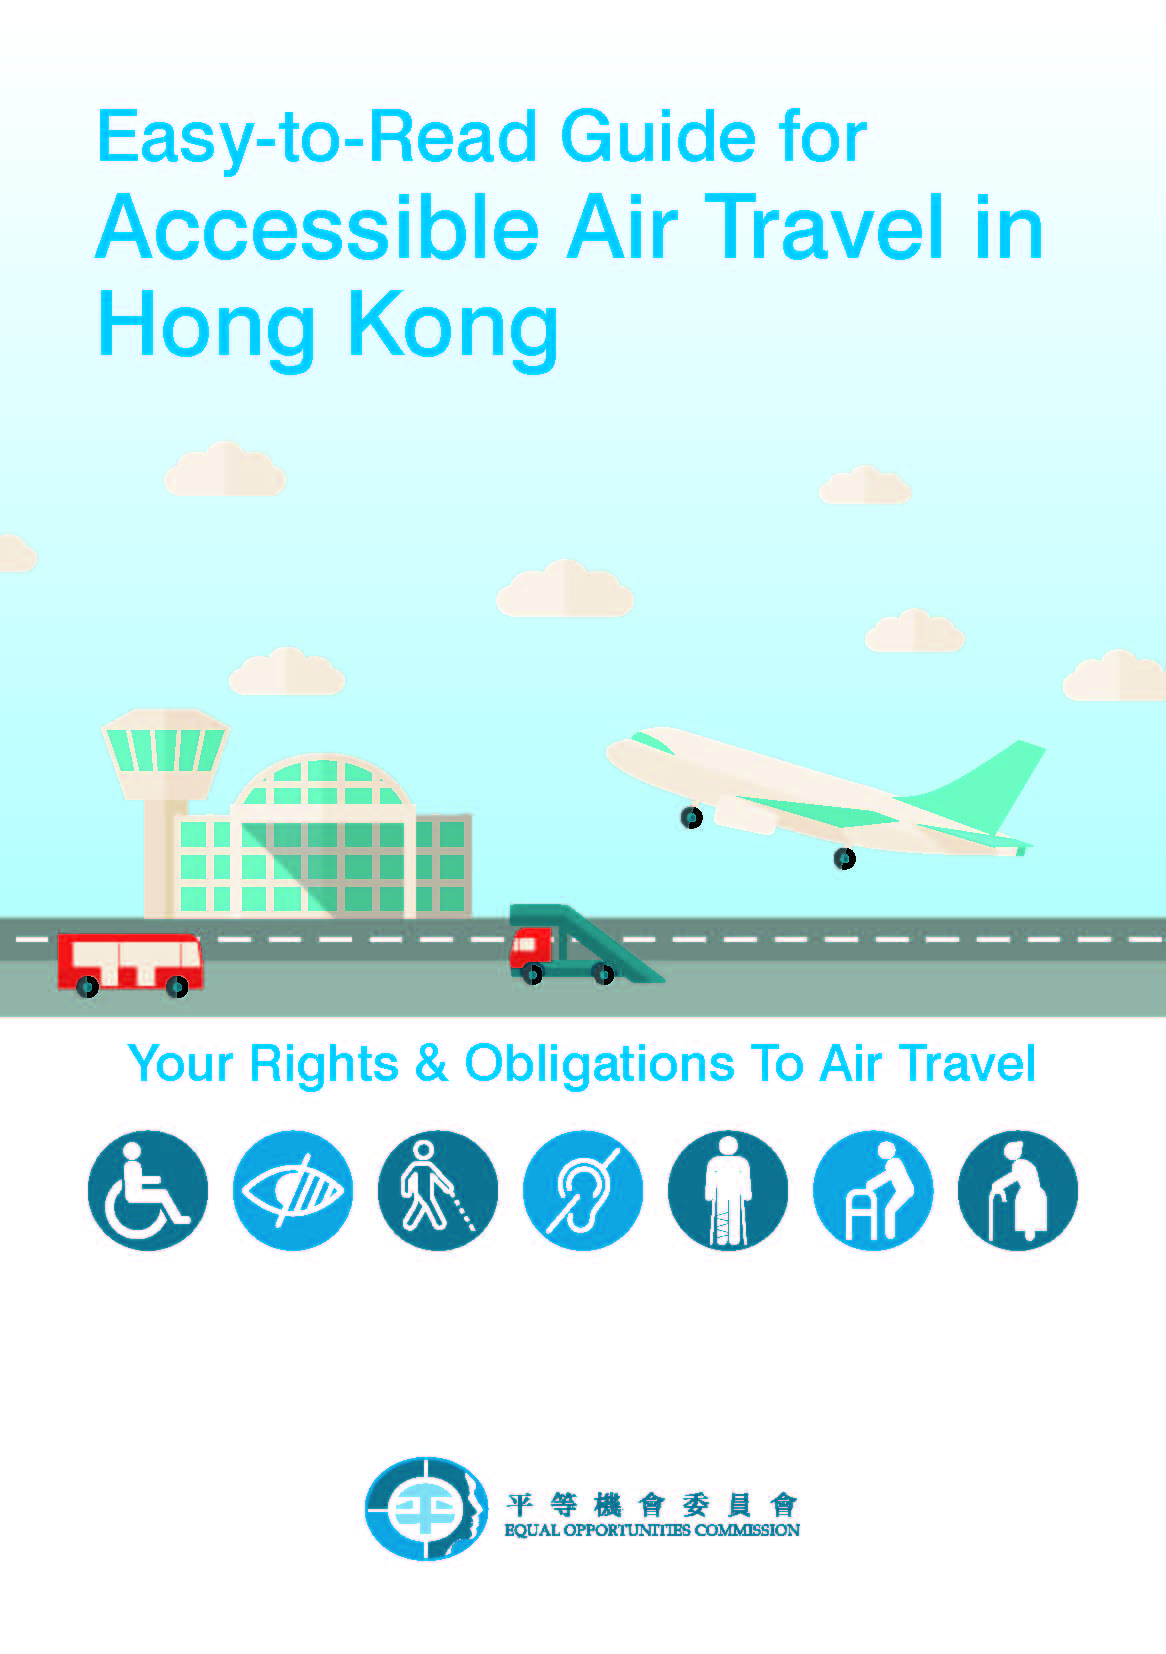 Cover of the Easy-to-Read Guide for Accessible Air Travel in Hong Kong